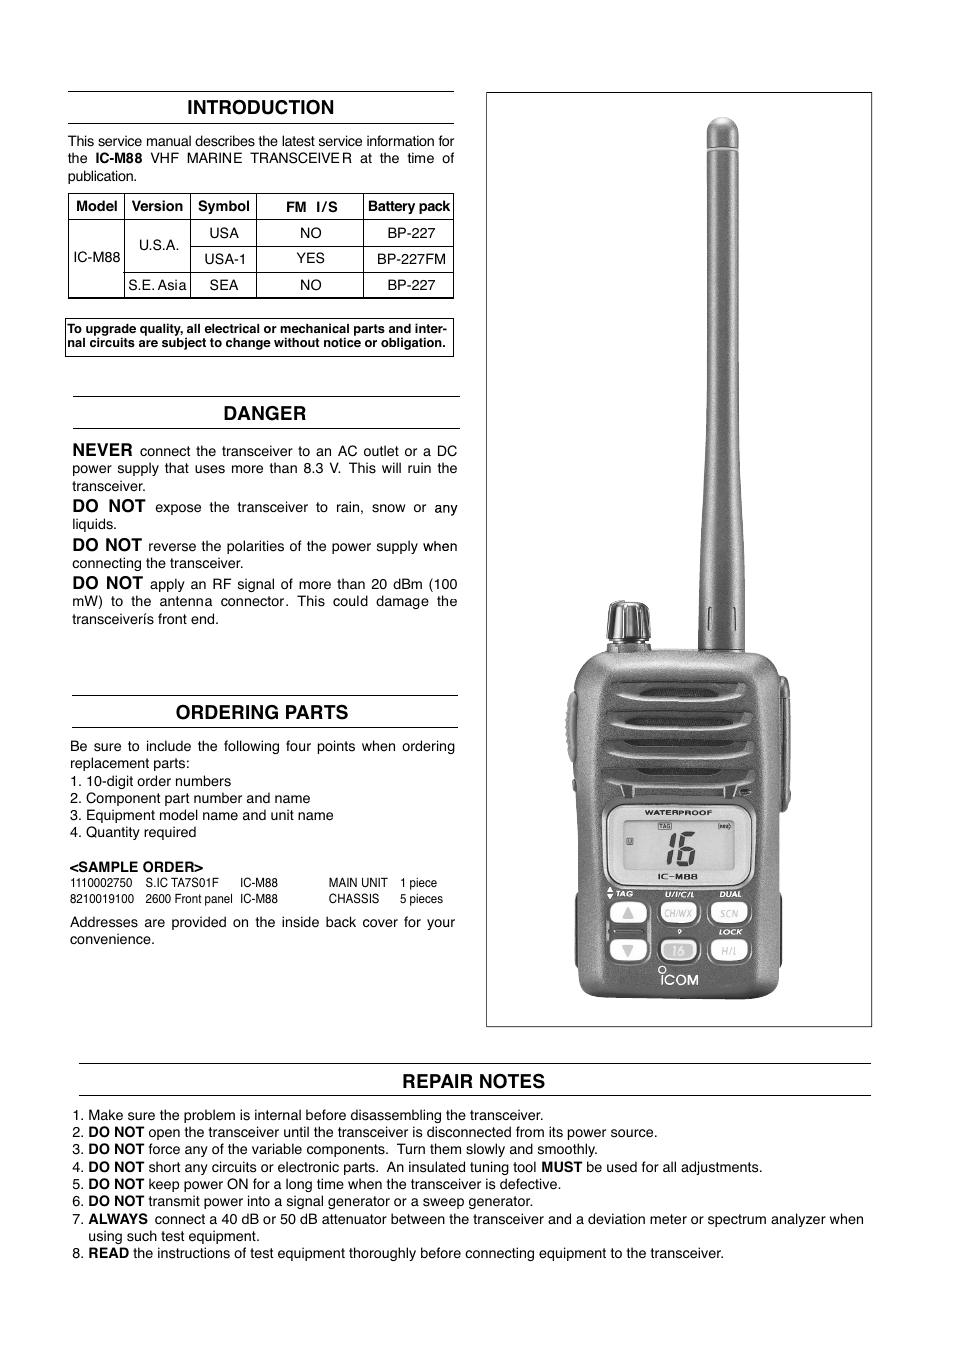 Introduction, Danger, Ordering parts | Icom VHF Marine Transceiver IC-M88  User Manual | Page 2 / 38 | Original mode